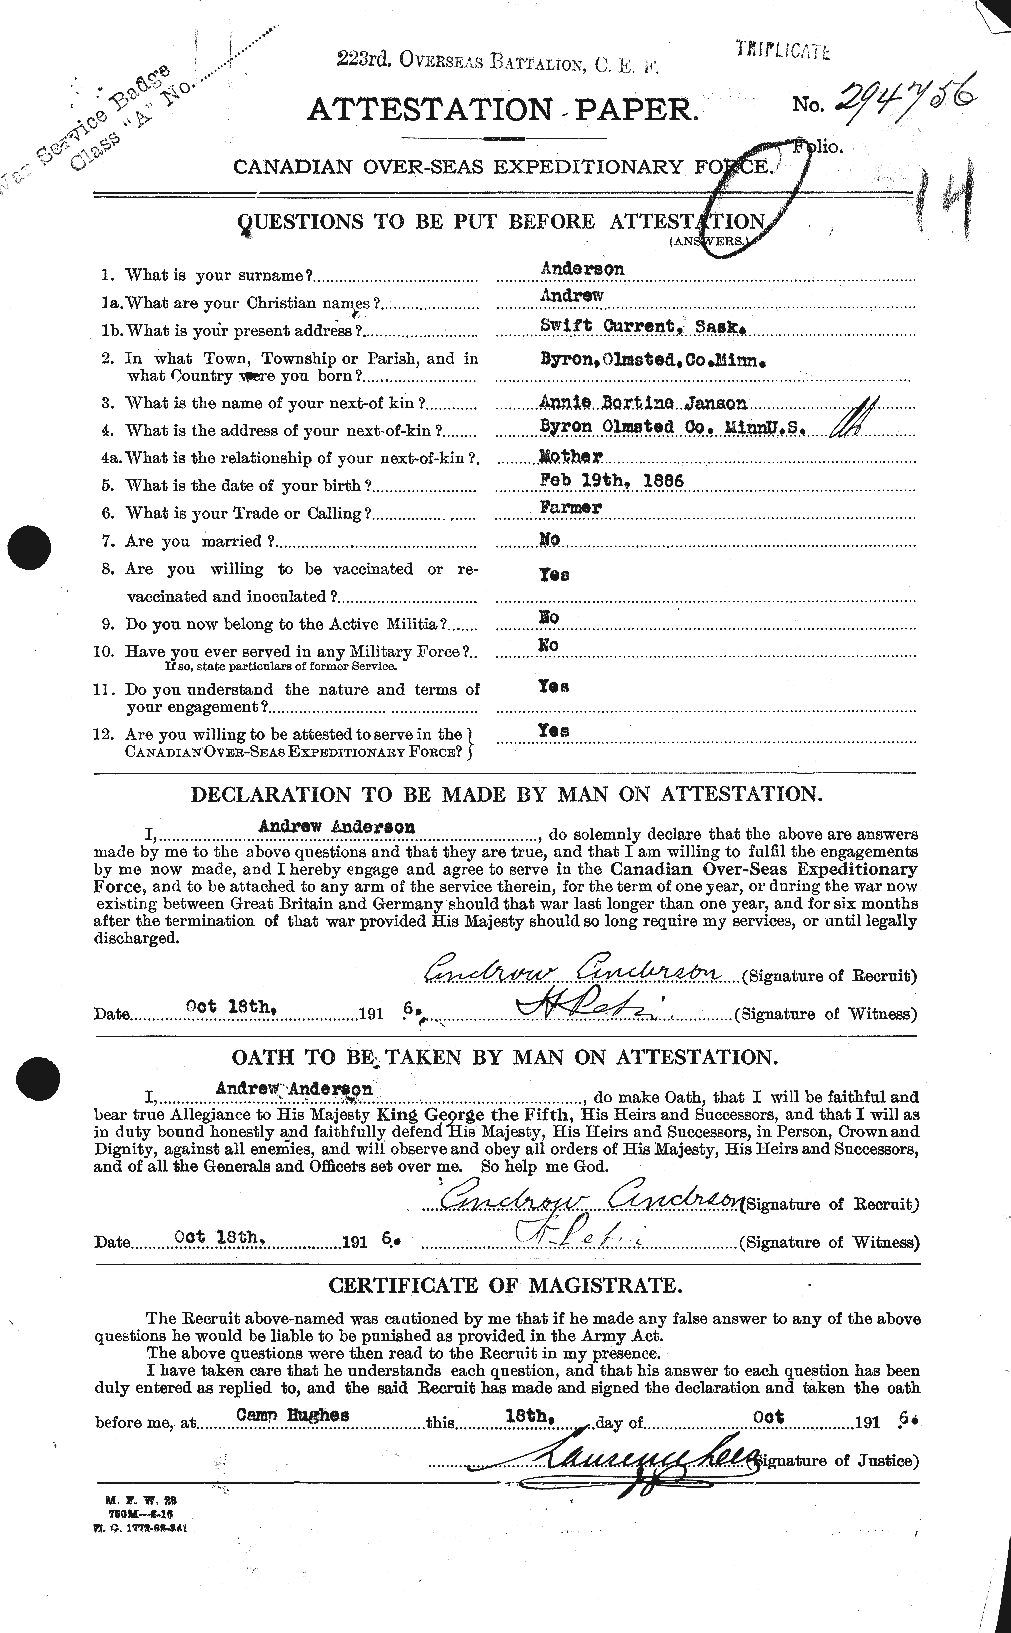 Personnel Records of the First World War - CEF 209426a